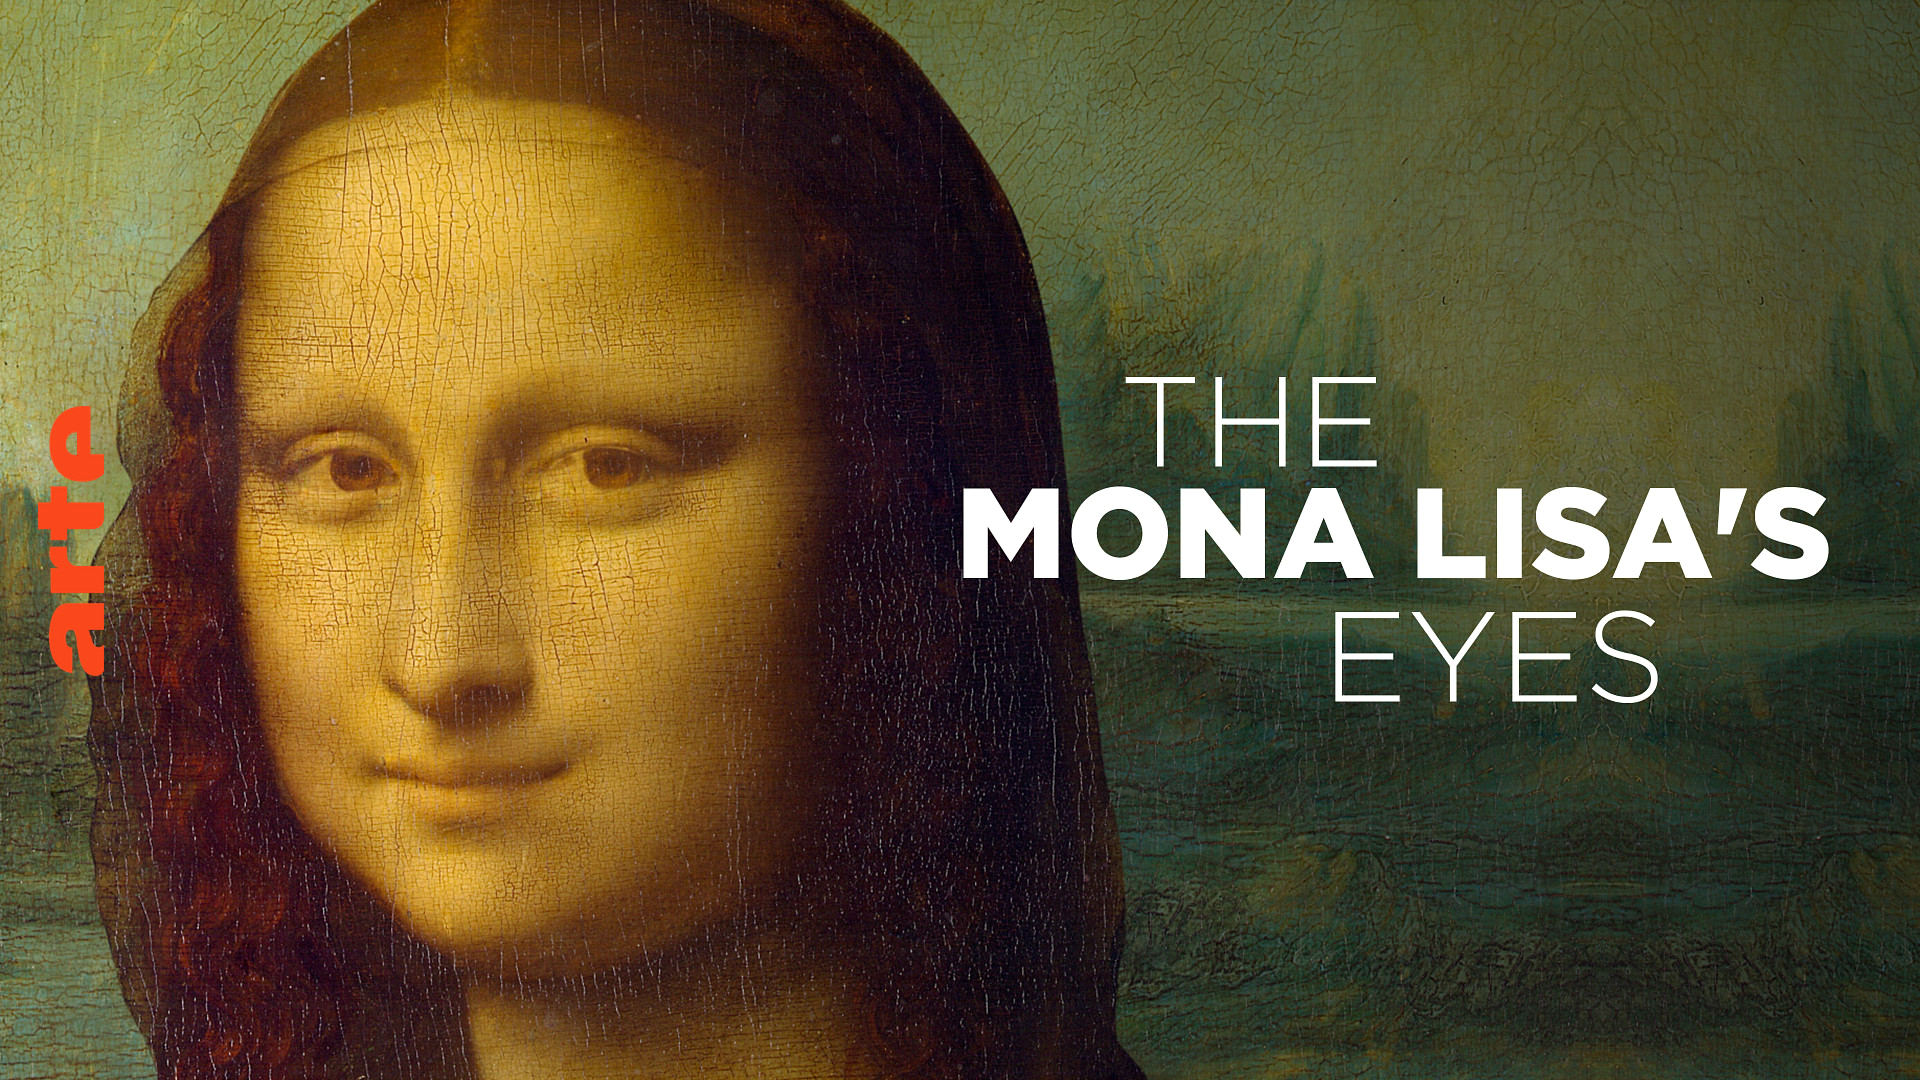 Xxx Video Monalisa - Gymnastics - The Mona Lisa's Eyes Don't Follow You Around the Room - Watch  the full documentary | ARTE in English